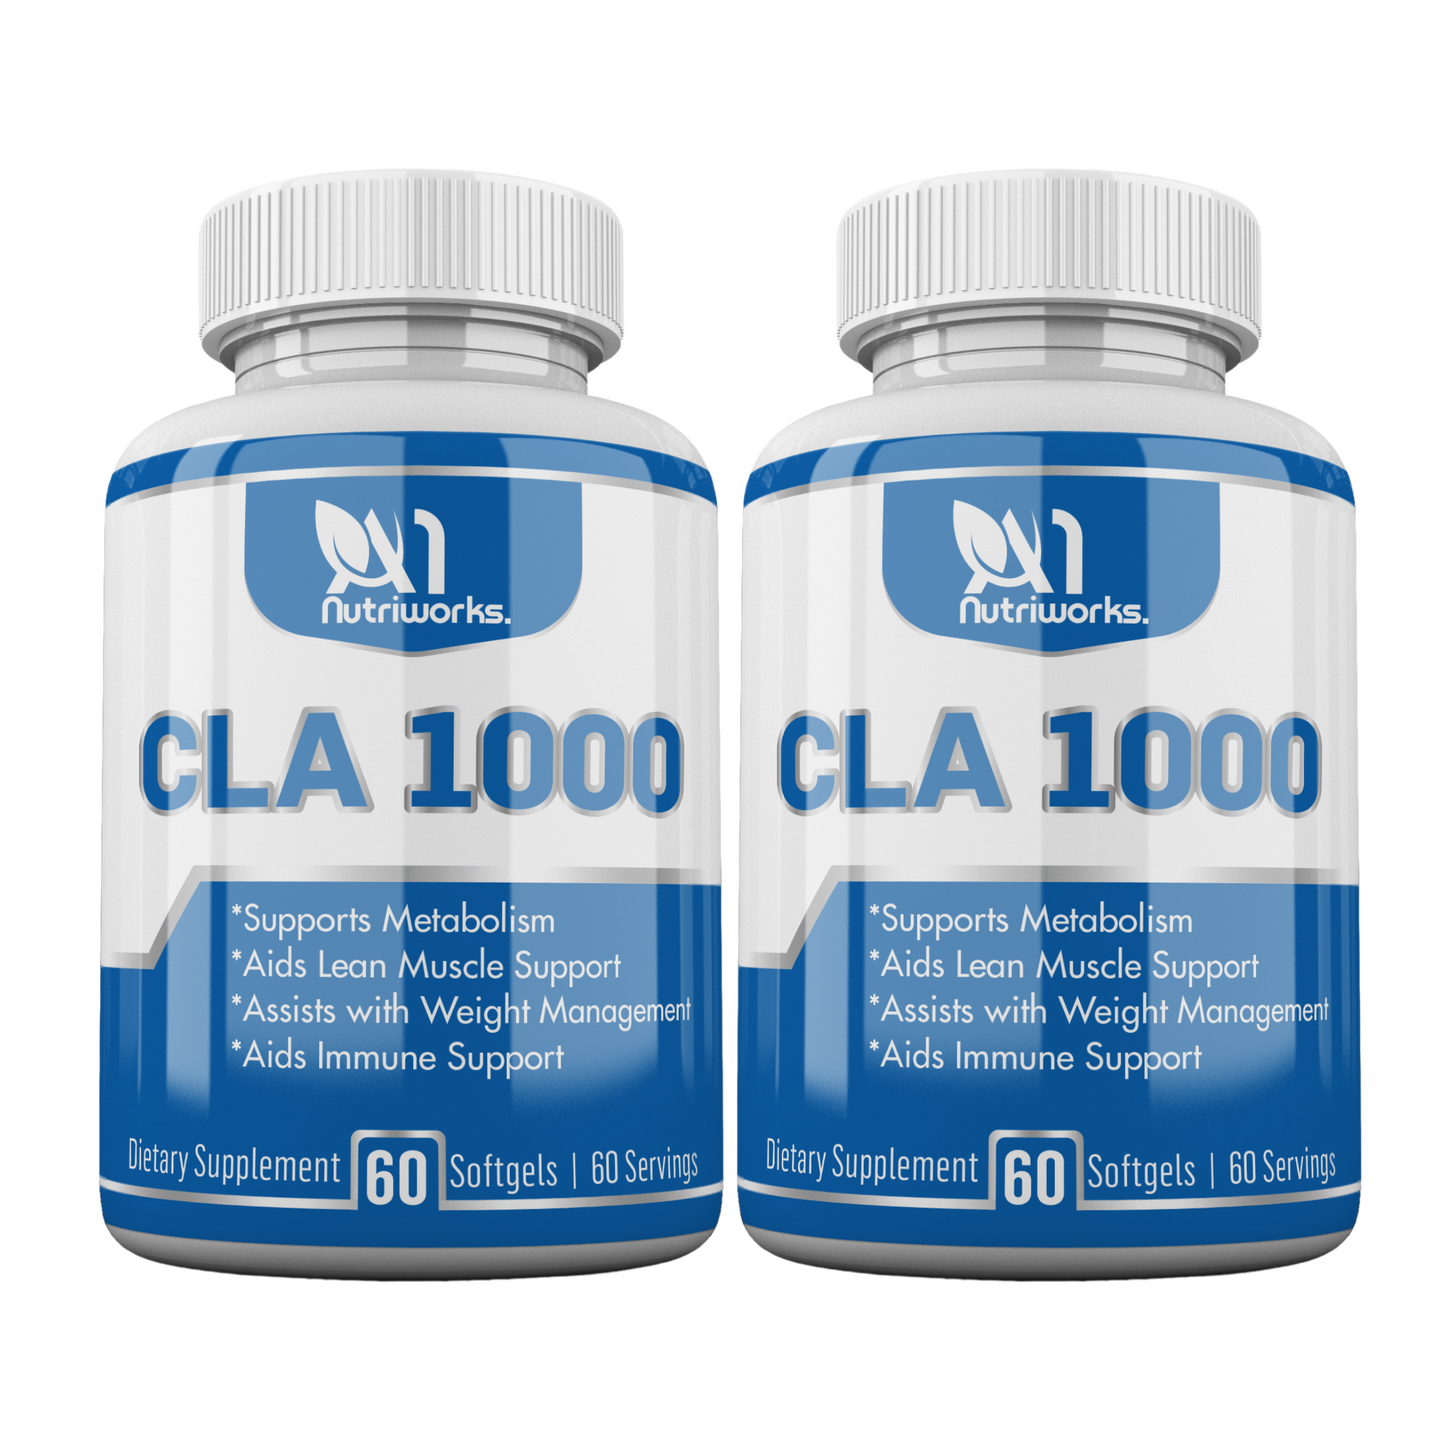 CLA 1000, Conjugated Linoleic Acid, Weight Loss Supplement, Metabolism Support, Stimulant-Free 2 Month Supply